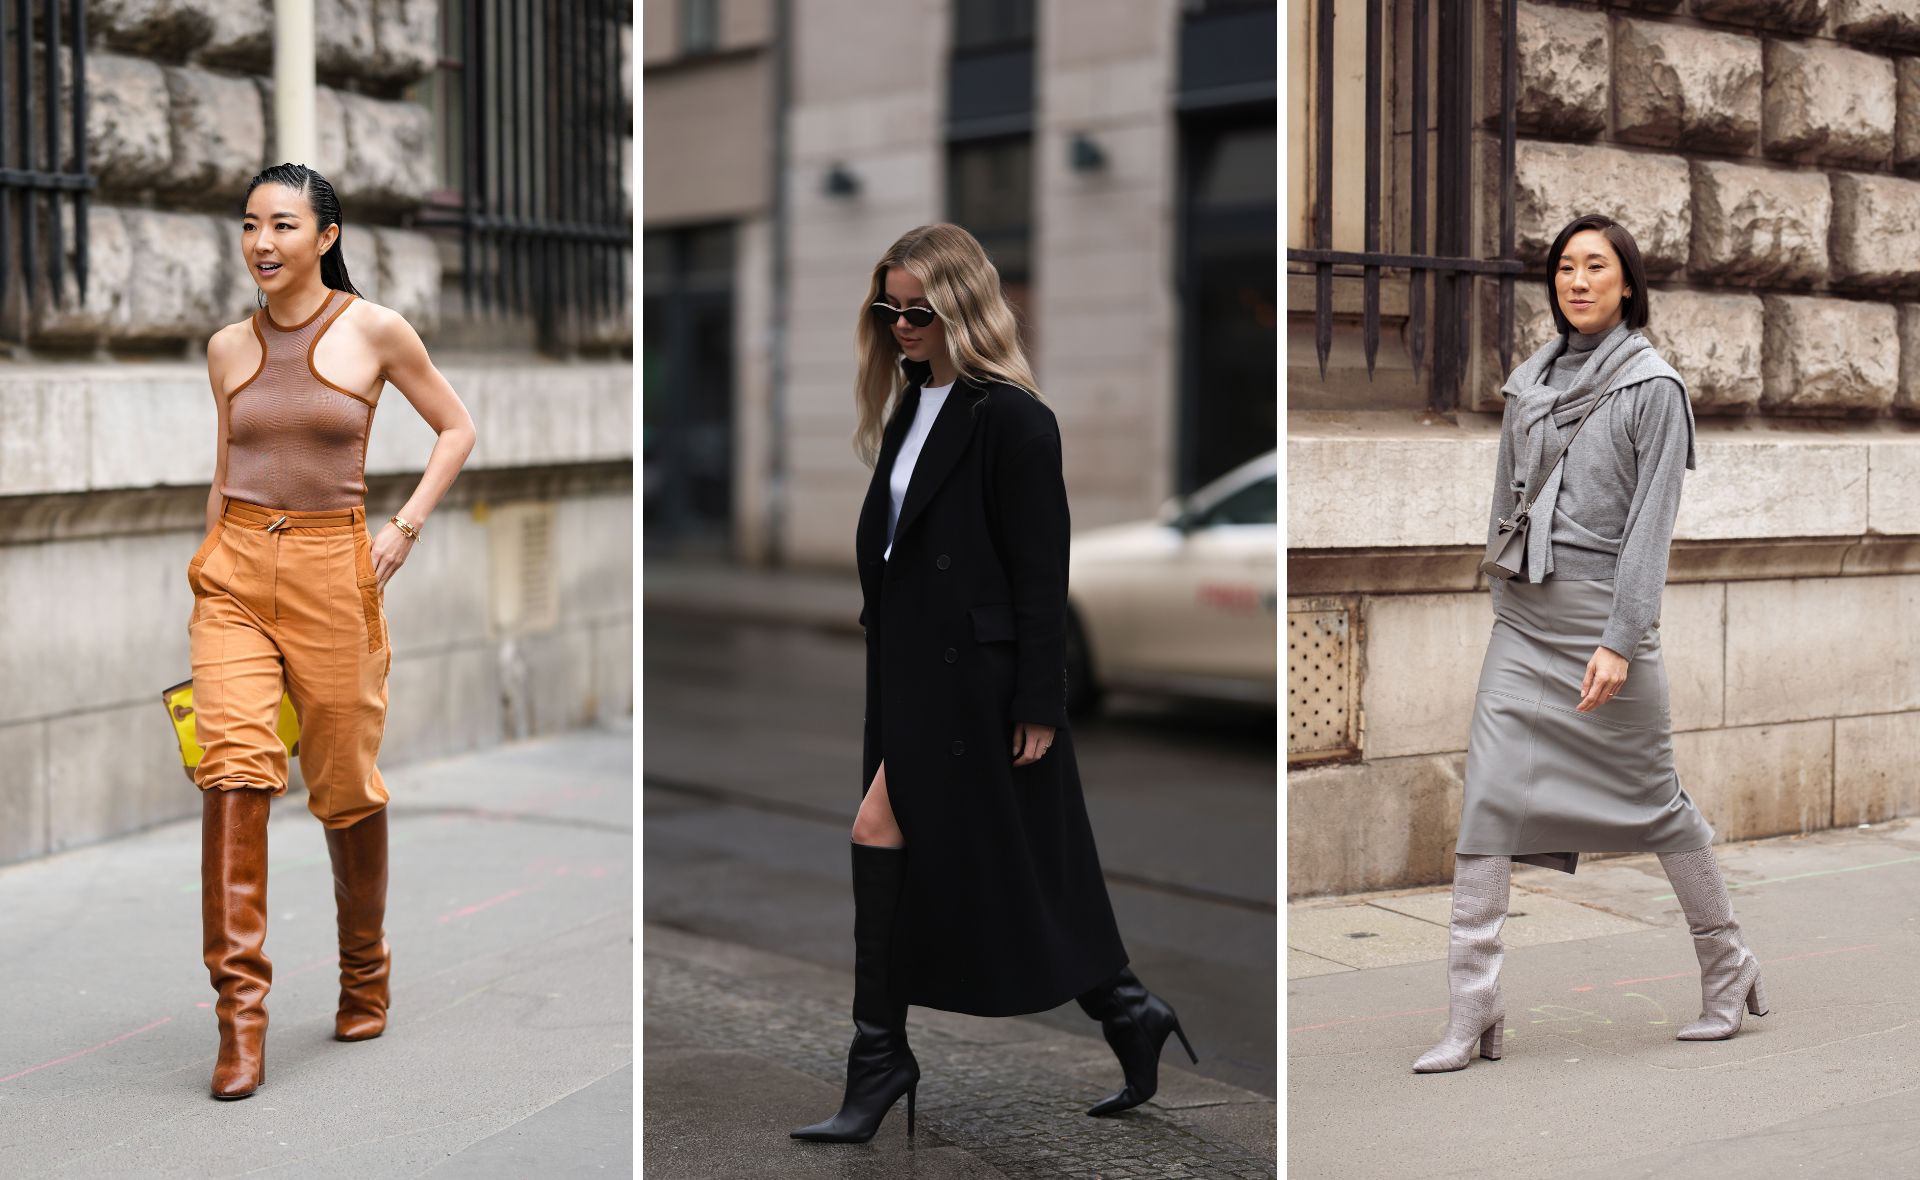 Kick up your footwear game this season with these killer knee high boots